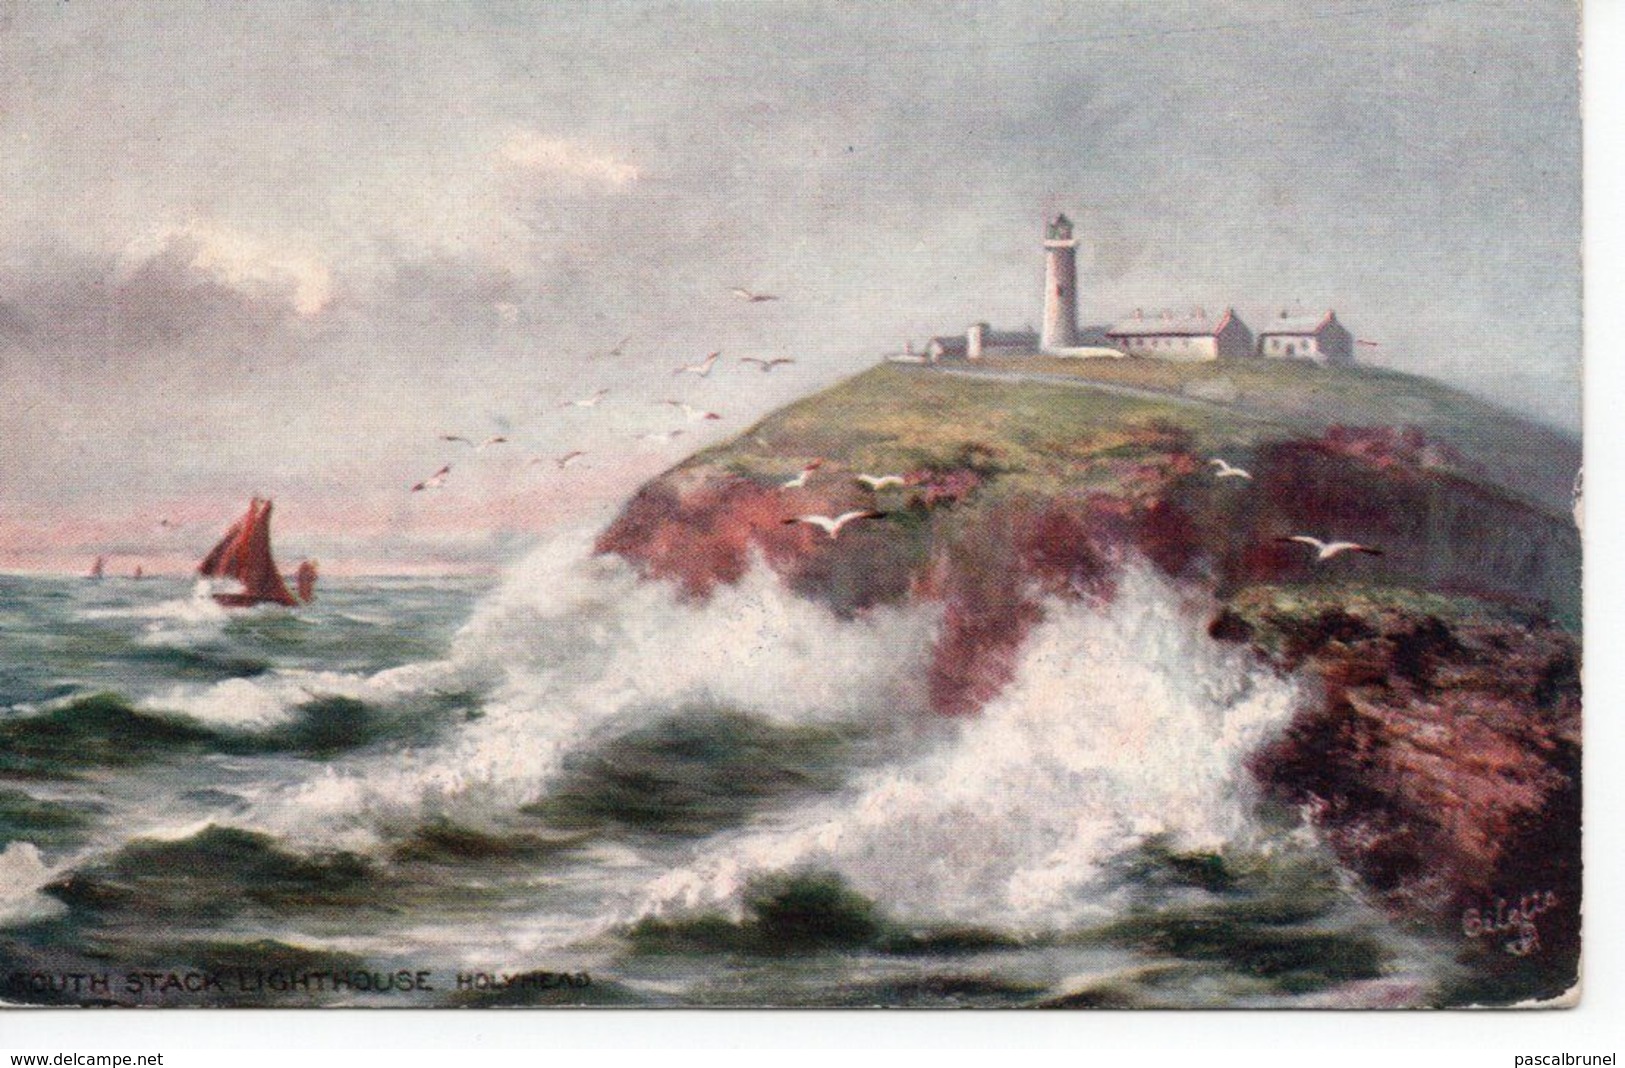 HOLYHEAD - SOUTH STACK LIGHTHOUSE - Unknown County